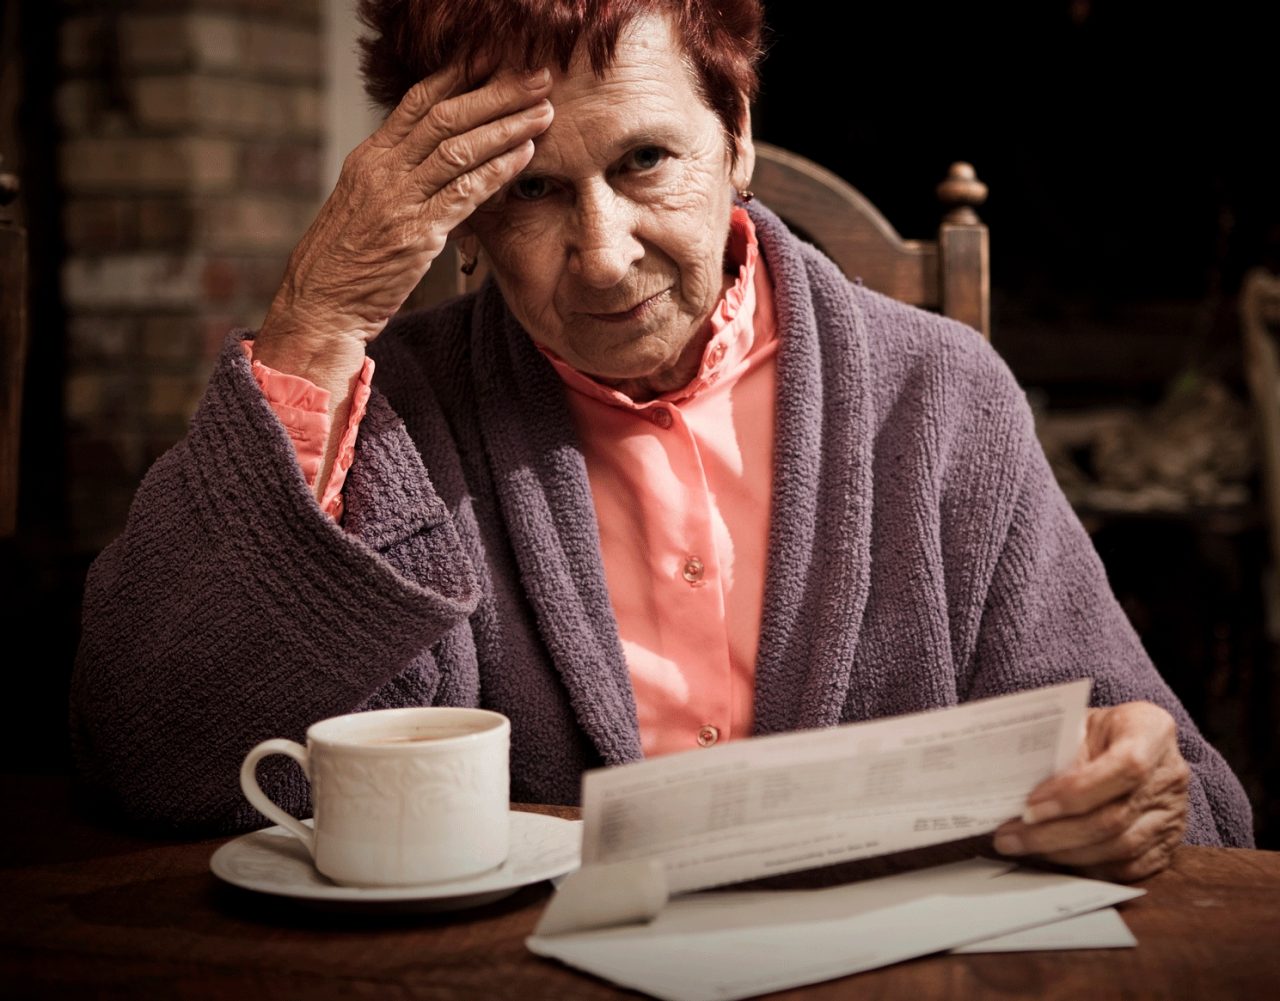 Are Unpaid Bills Making You Put Off Care?